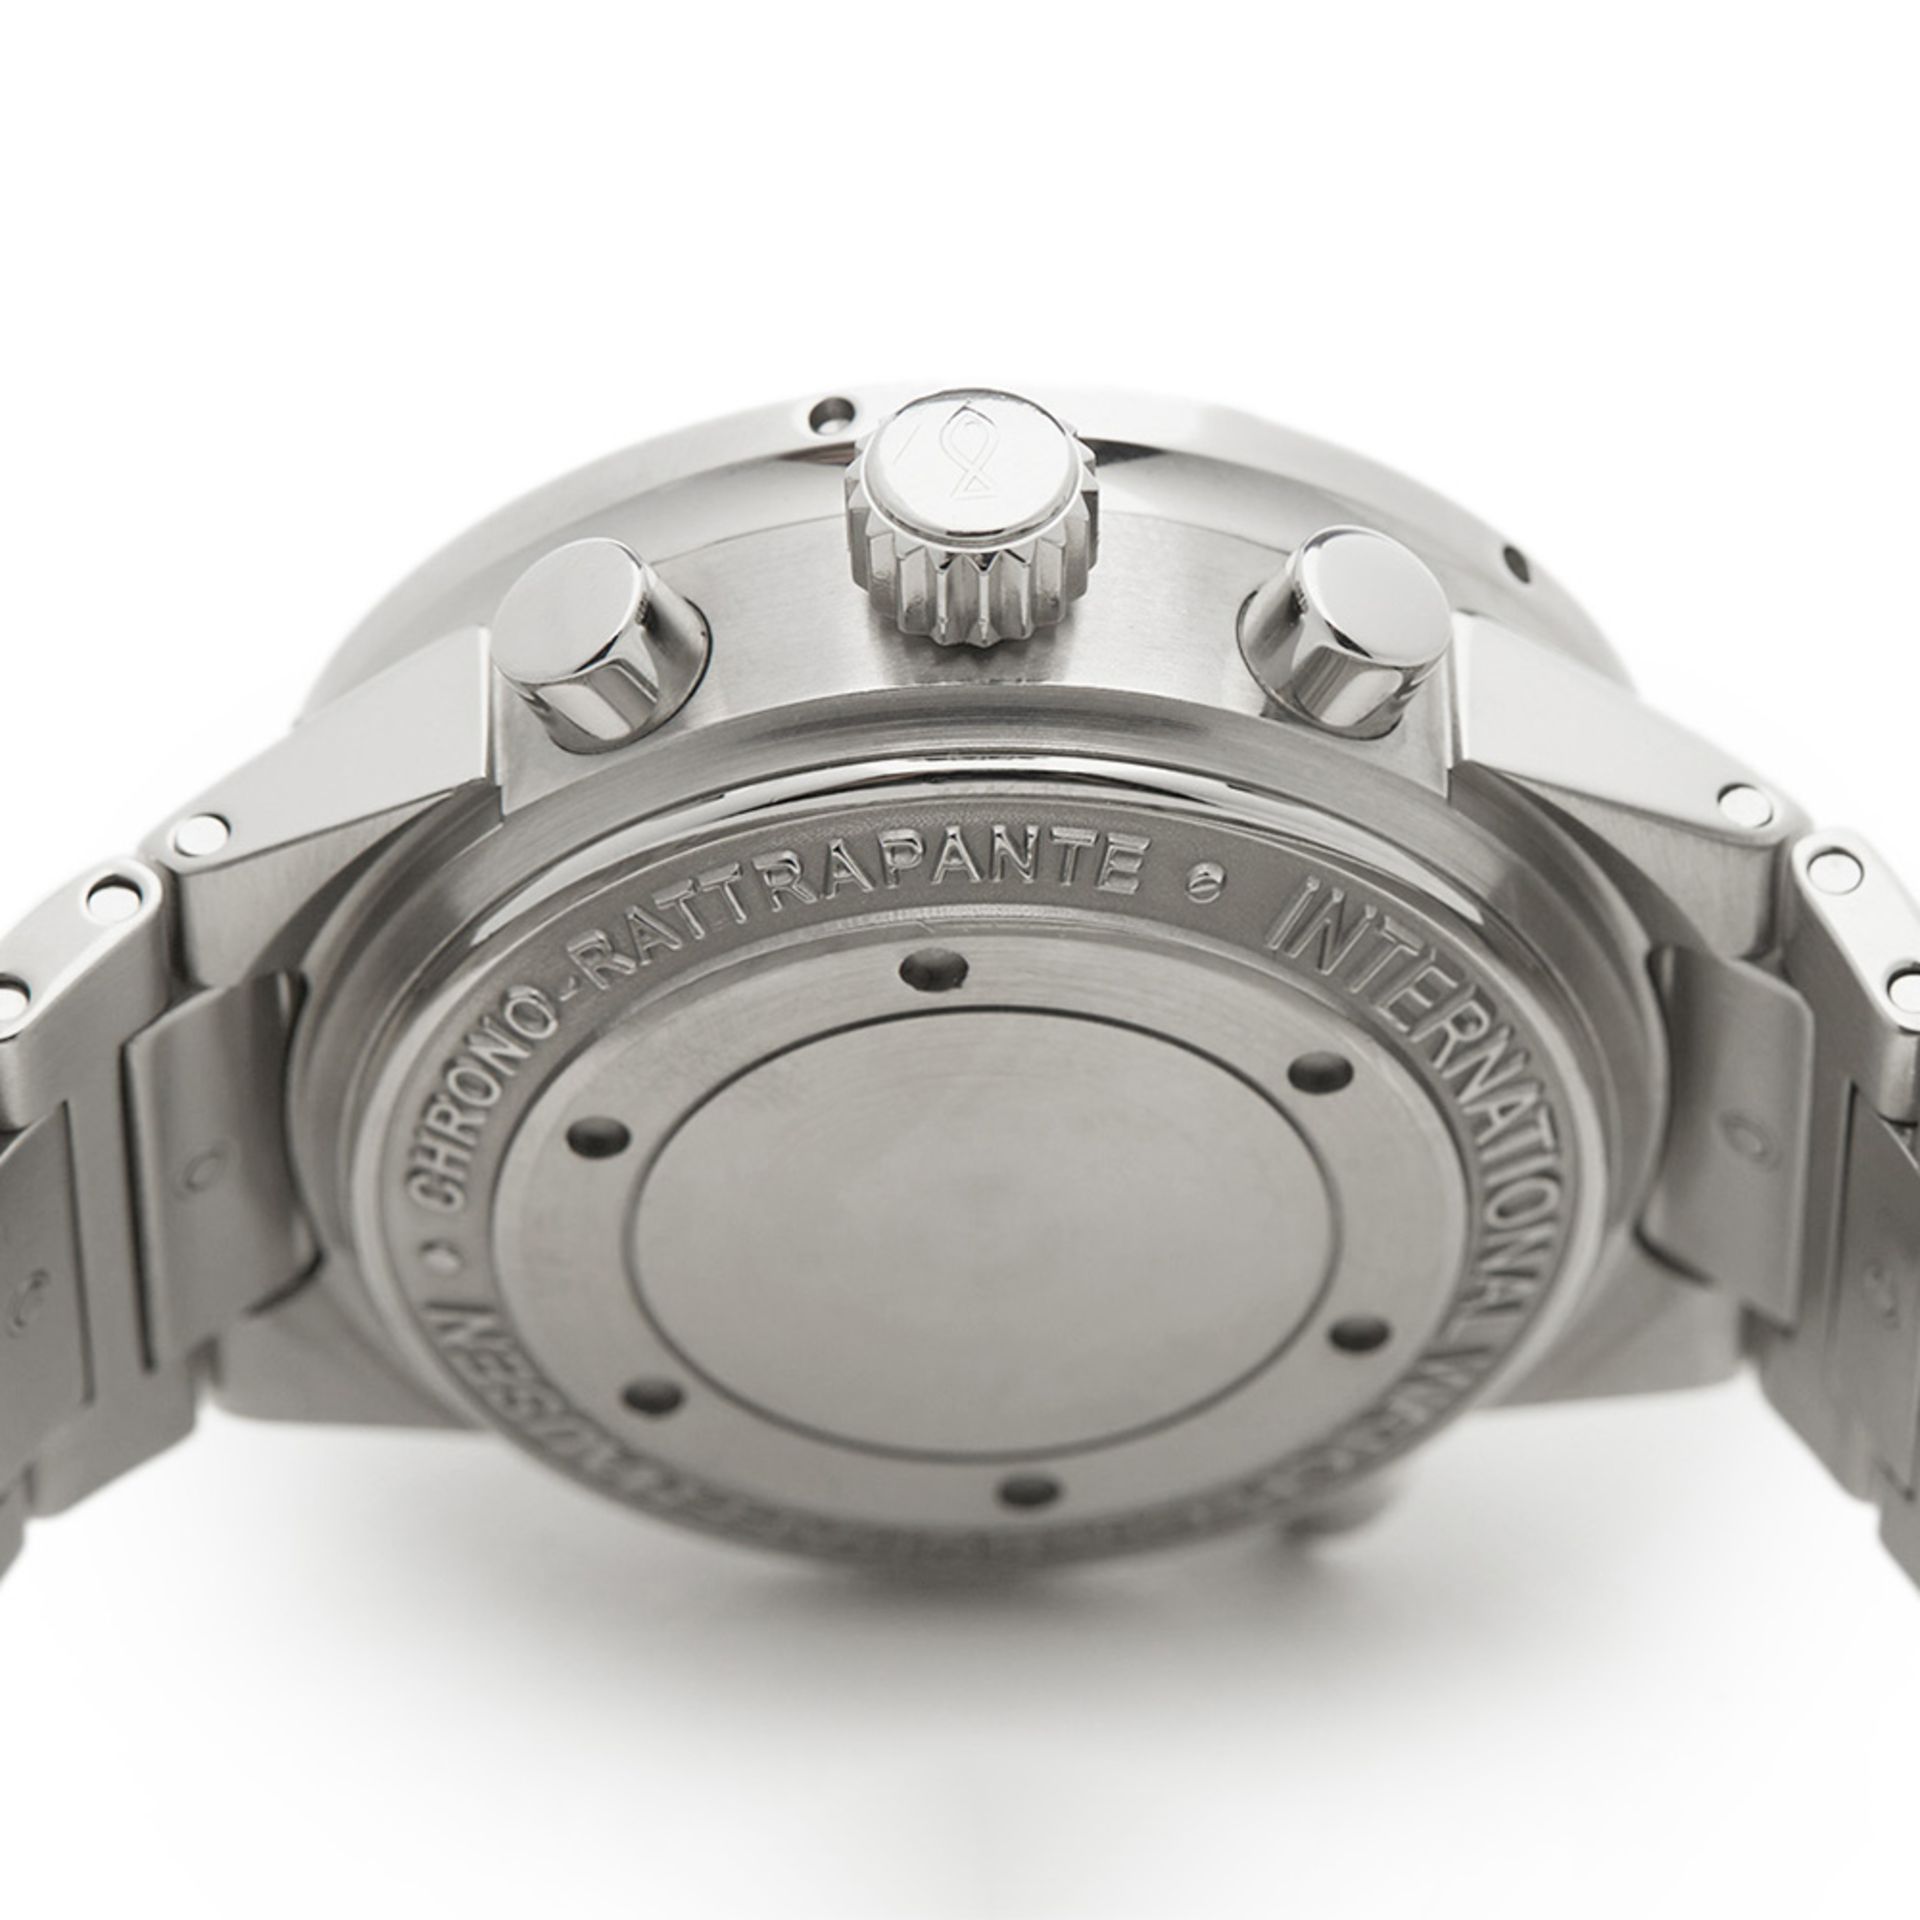 IWC GST Rattrapante Chronograph 43mm Stainless Steel - IW371523 - Image 8 of 9